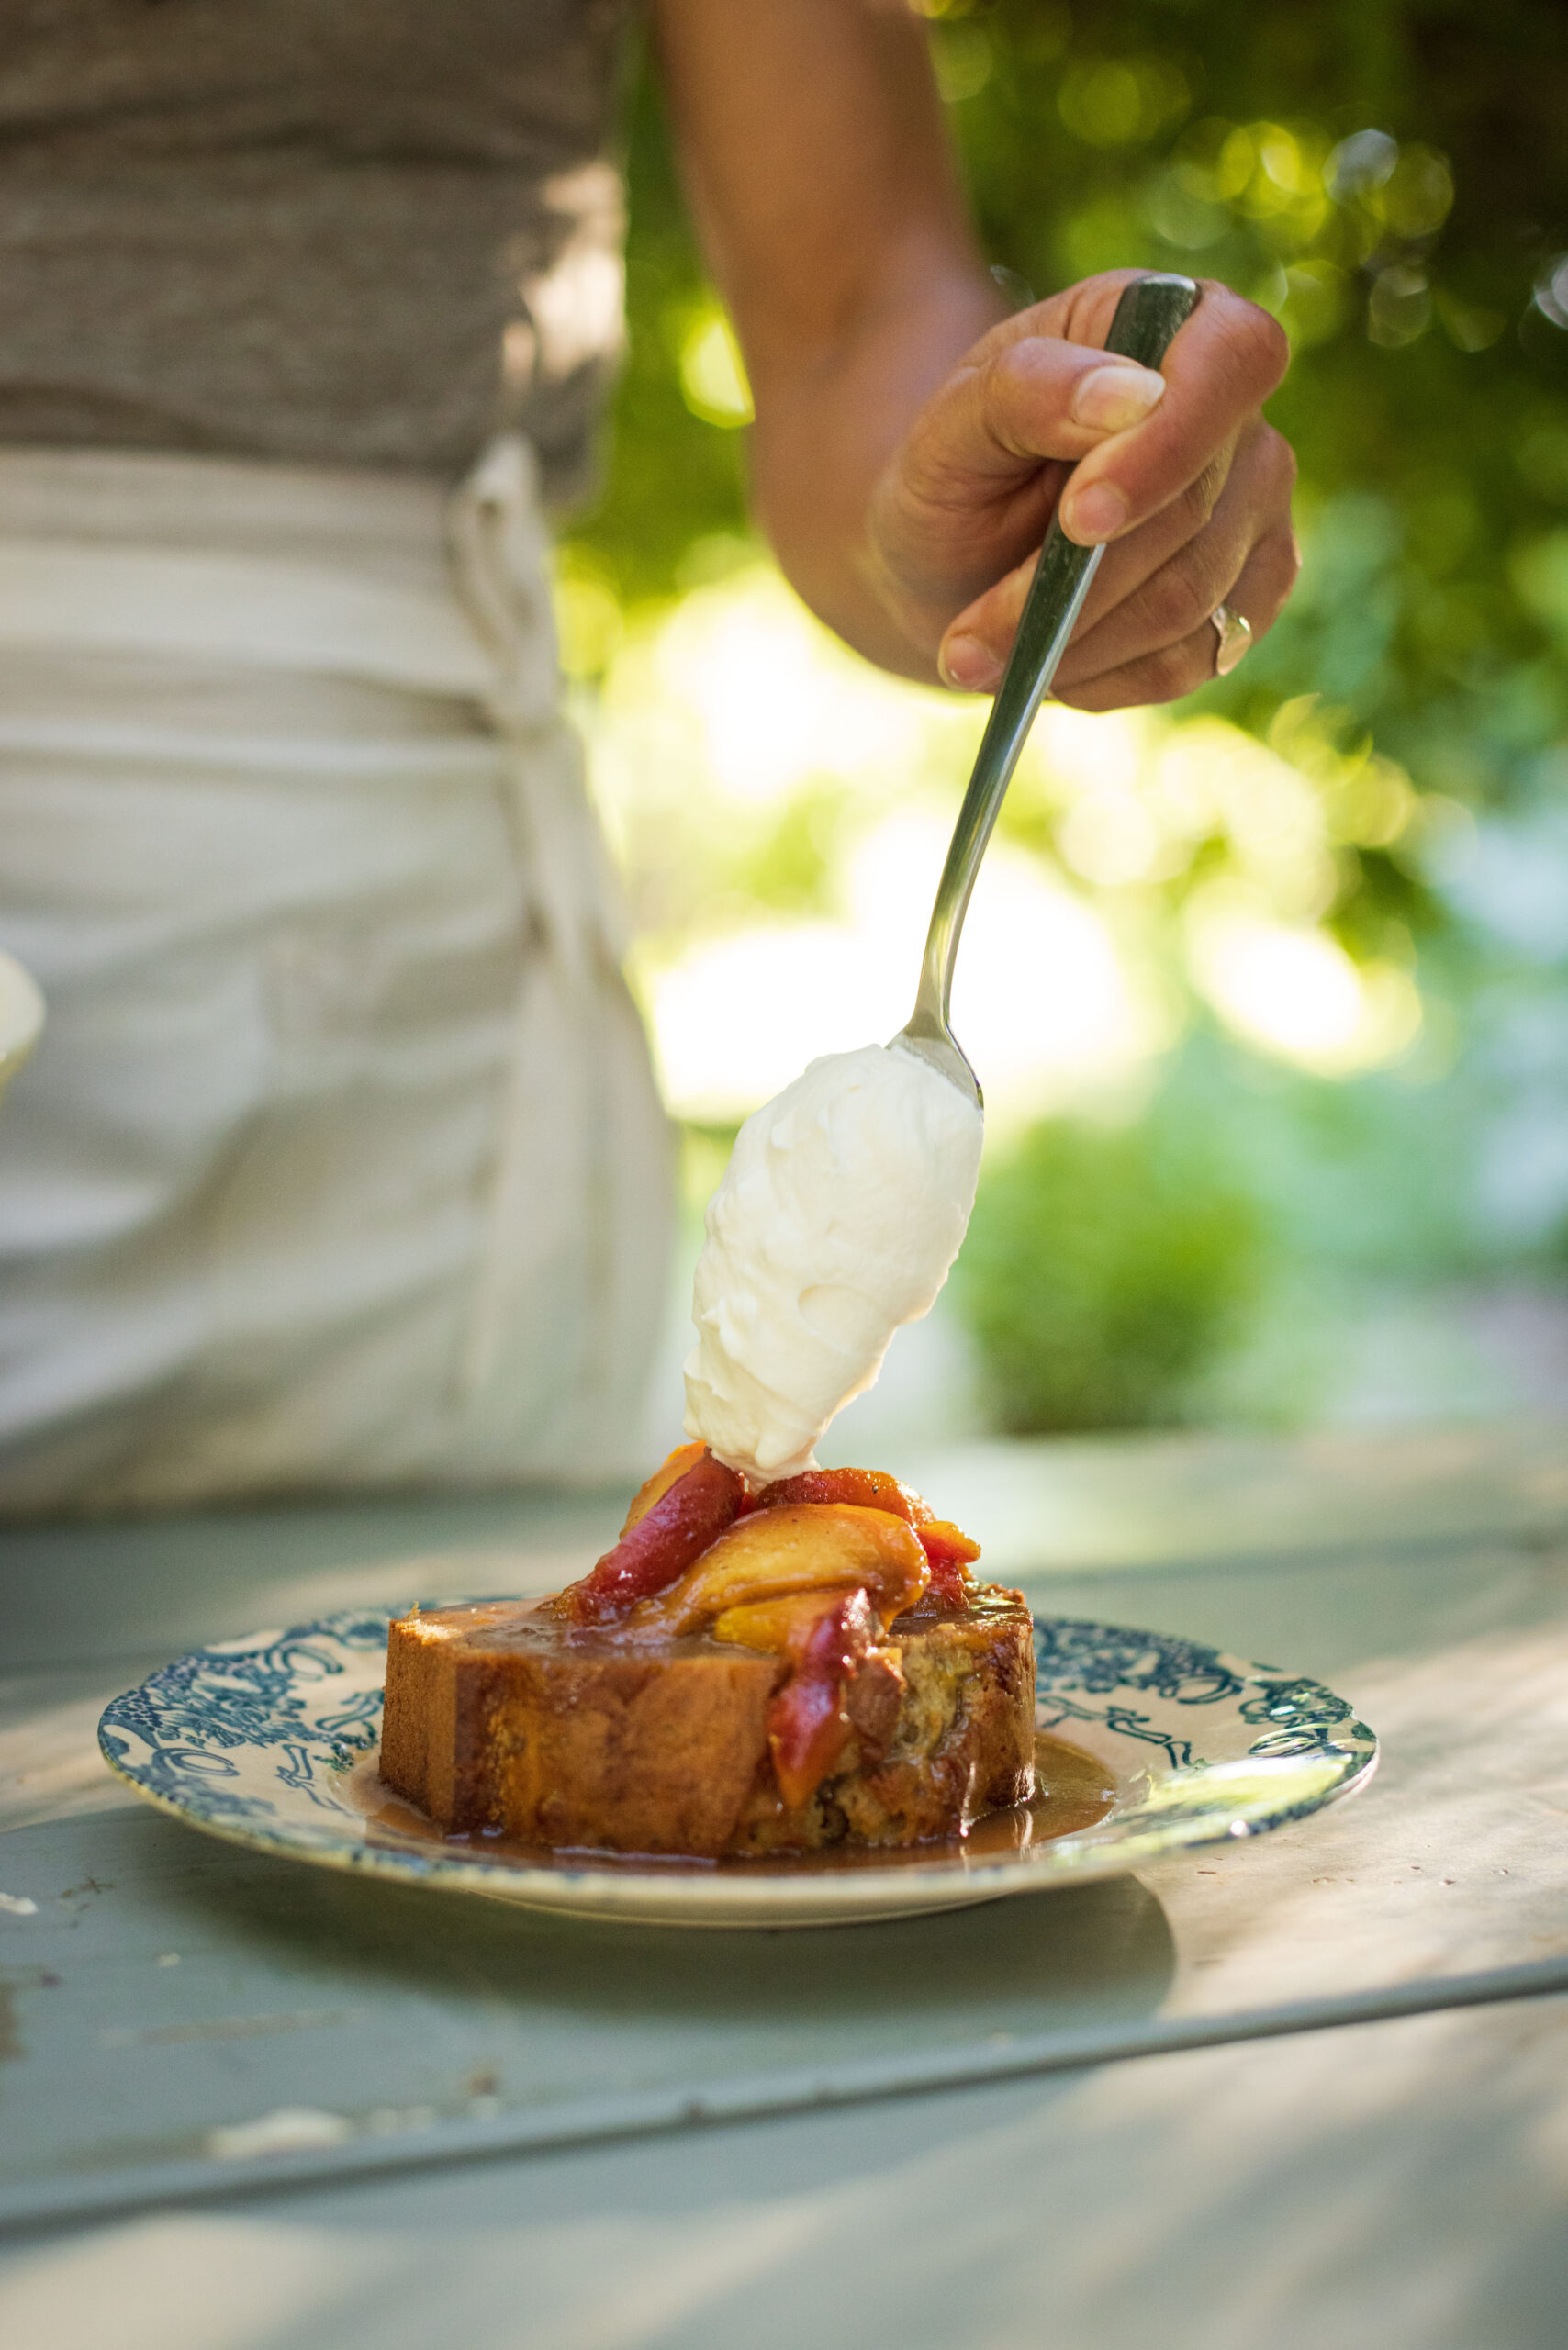 Ras El Hanout Pound Cake With Grilled Peaches. (Conor Hagen)